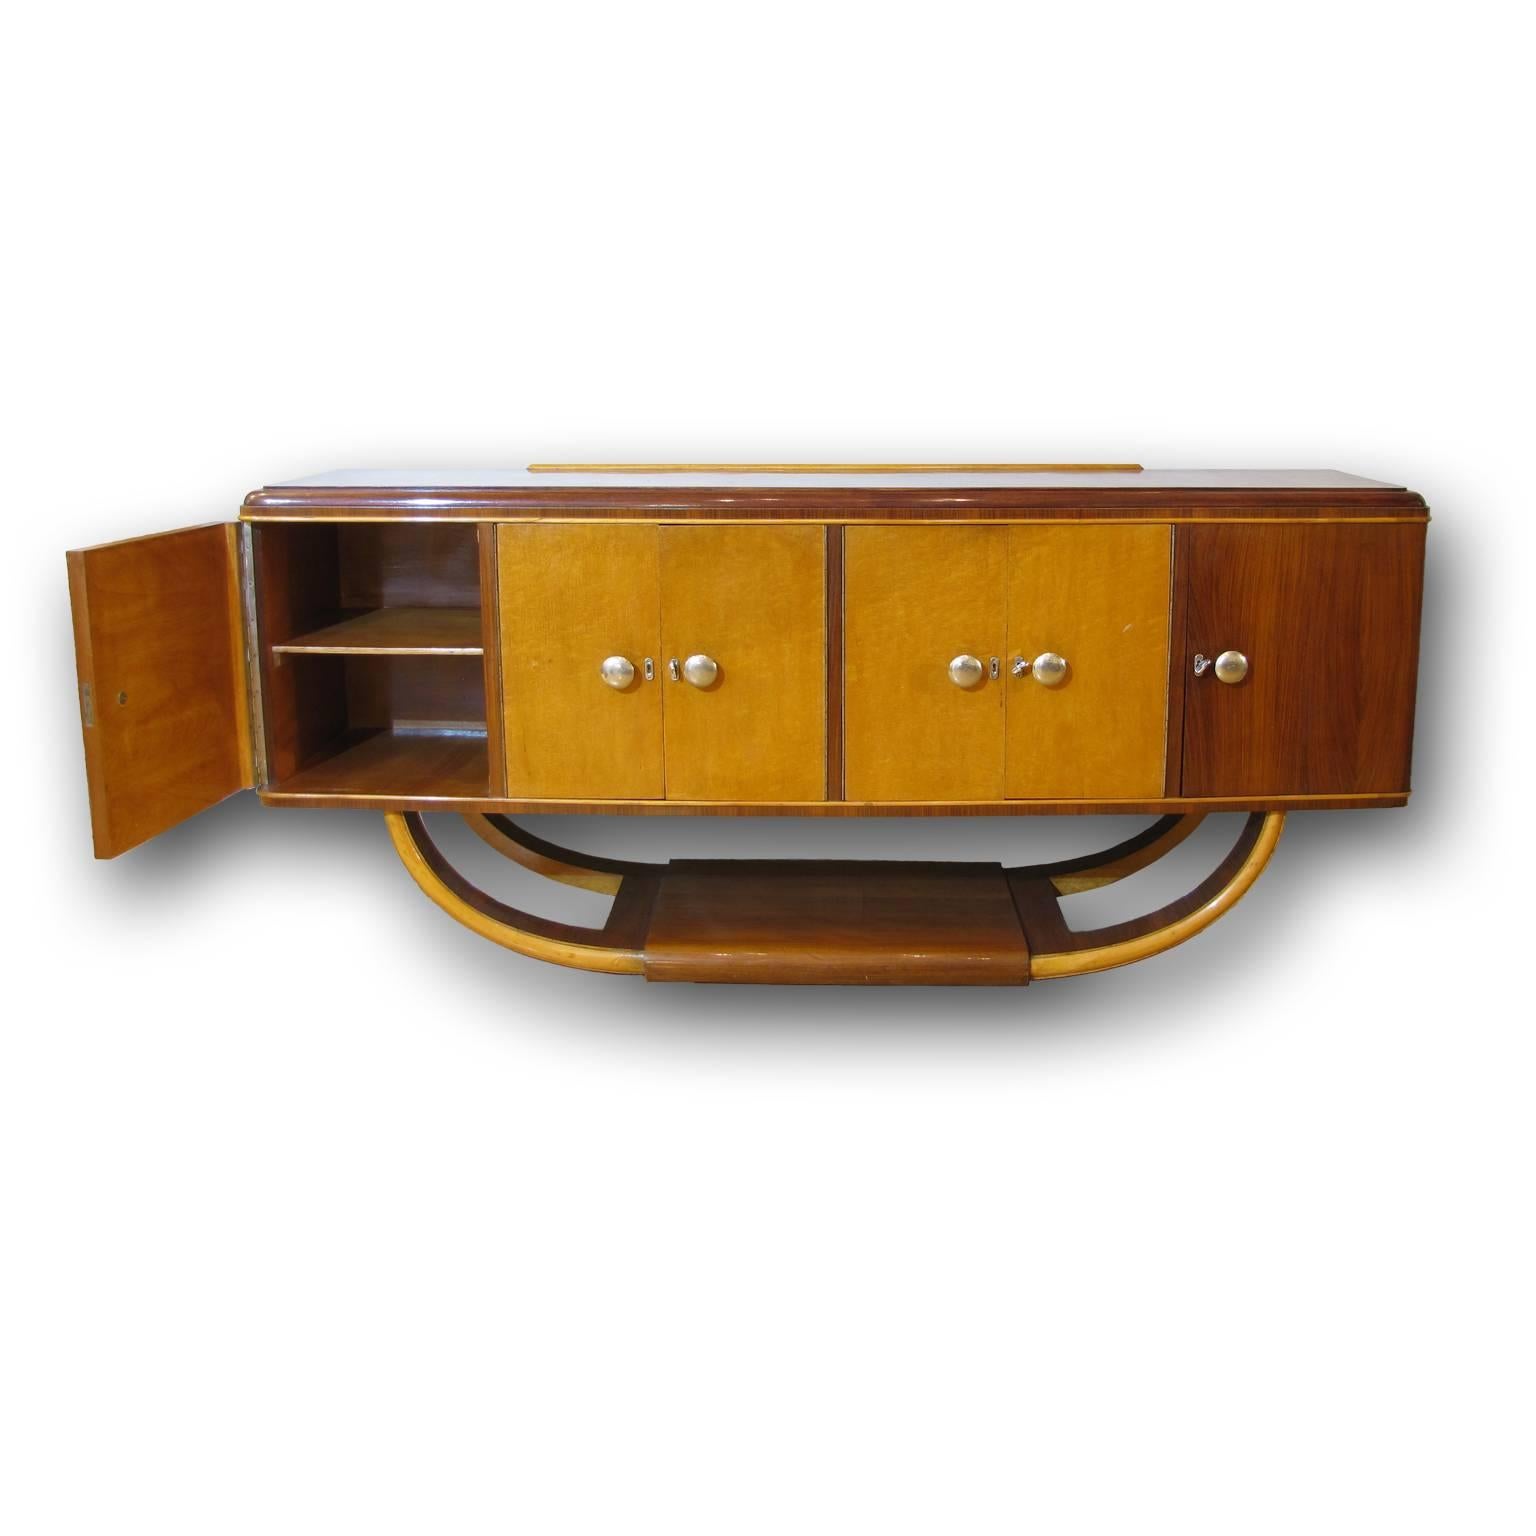 Italian Mid-20th Century Art Deco Credenza or Buffet in Palisander and Maple 2